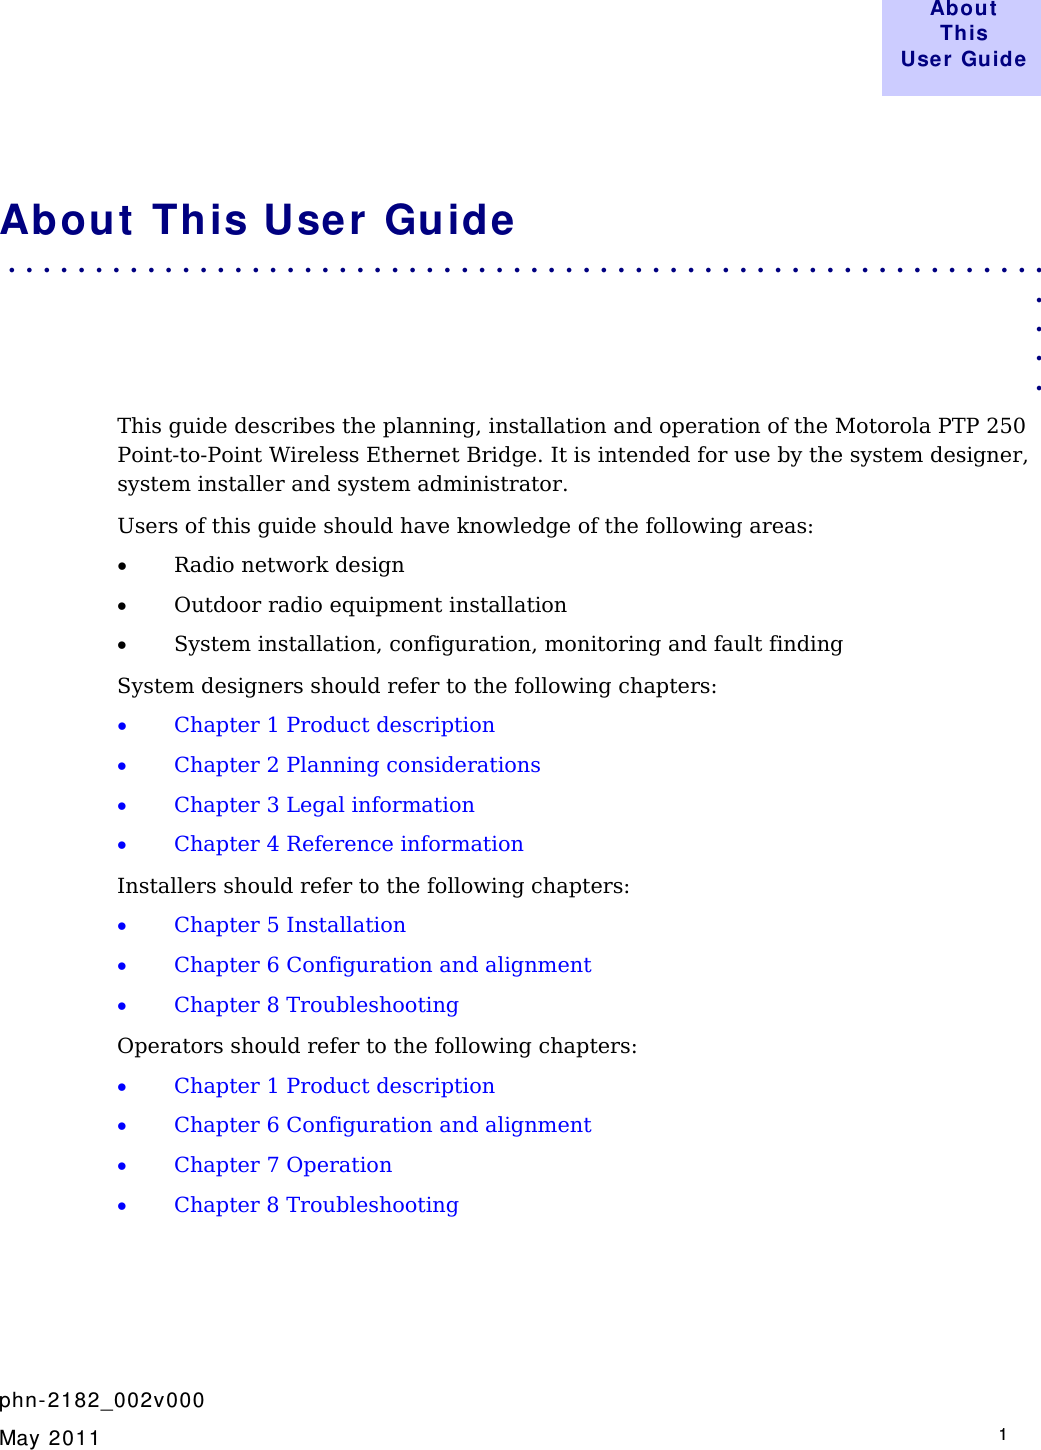  About  This User Guide     phn- 2182_002v000   May 2011   1  About  This User Guide . . . . . . . . . . . . . . . . . . . . . . . . . . . . . . . . . . . . . . . . . . . . . . . . . . . . . . . . . . . .  . . . . This guide describes the planning, installation and operation of the Motorola PTP 250 Point-to-Point Wireless Ethernet Bridge. It is intended for use by the system designer, system installer and system administrator.  Users of this guide should have knowledge of the following areas: • Radio network design • Outdoor radio equipment installation • System installation, configuration, monitoring and fault finding System designers should refer to the following chapters: • Chapter 1 Product description • Chapter 2 Planning considerations • Chapter 3 Legal information • Chapter 4 Reference information Installers should refer to the following chapters: • Chapter 5 Installation • Chapter 6 Configuration and alignment • Chapter 8 Troubleshooting Operators should refer to the following chapters: • Chapter 1 Product description • Chapter 6 Configuration and alignment • Chapter 7 Operation • Chapter 8 Troubleshooting    